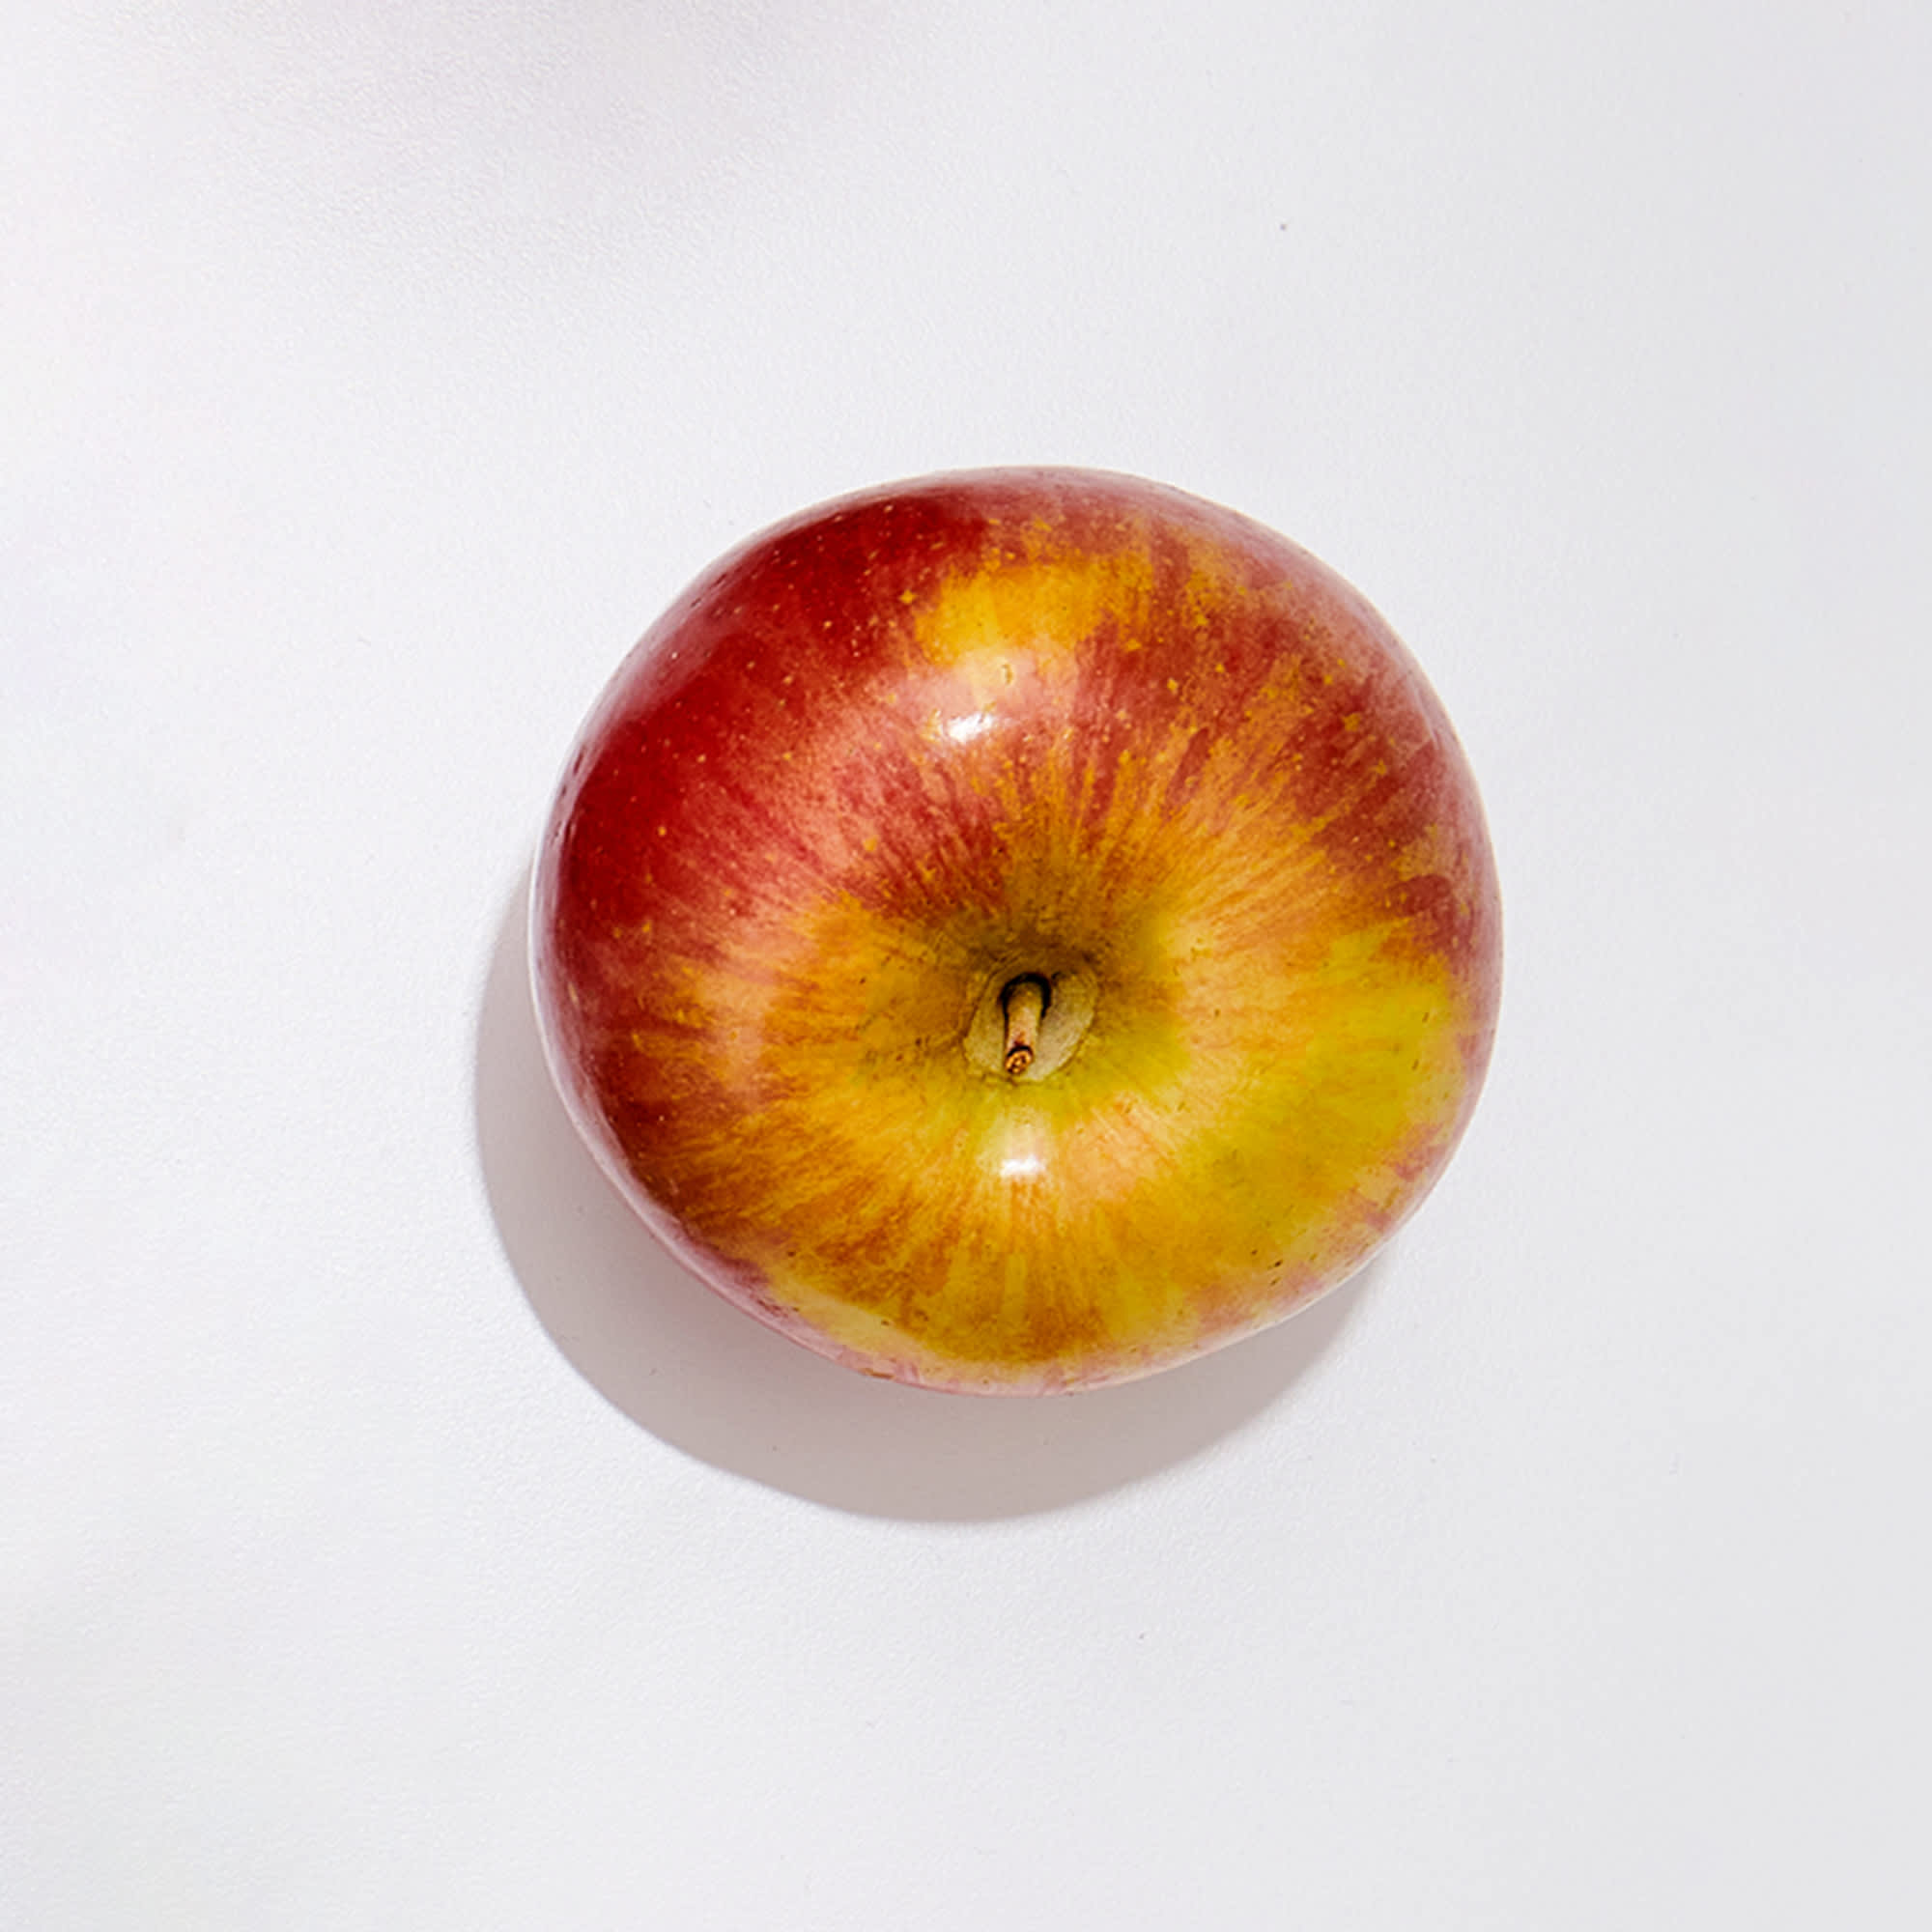 The 16 Best Apples for Snacking (Fuji, Gala & More)